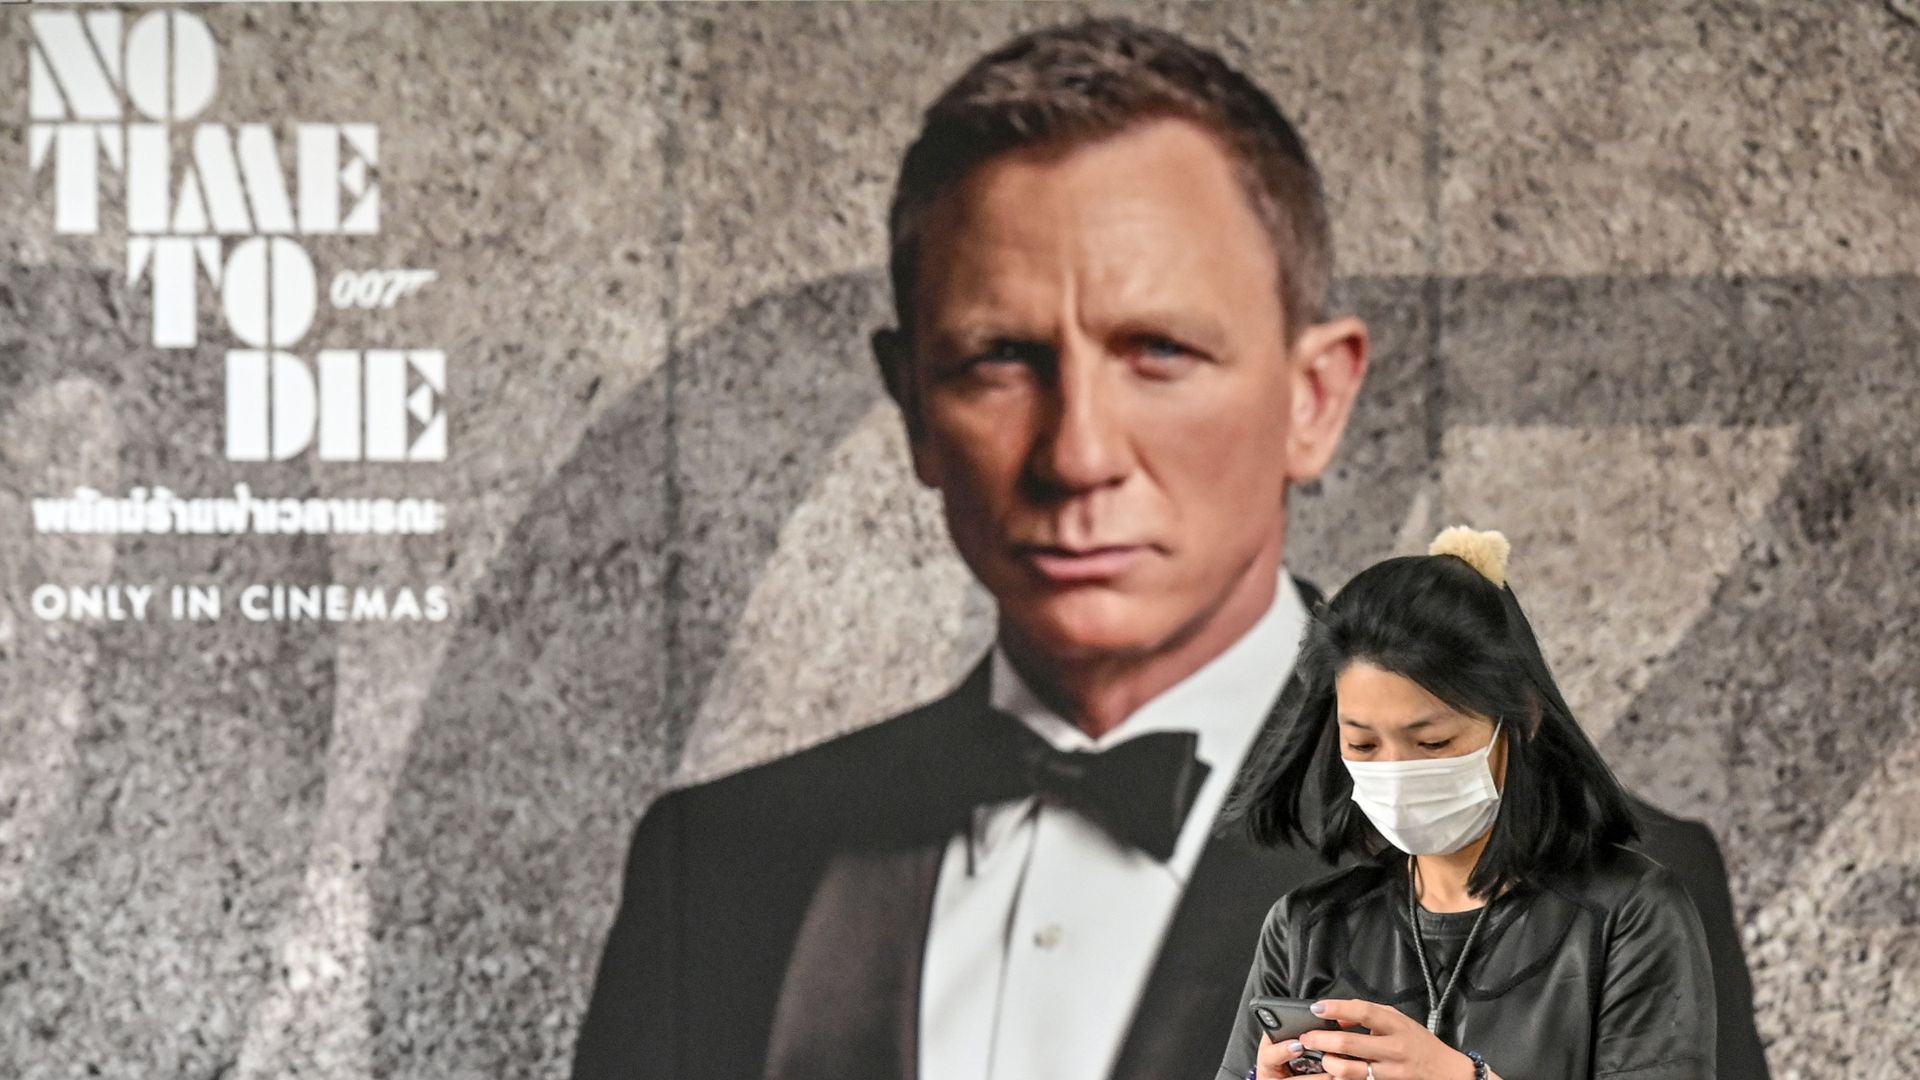 A woman wearing a face mask in front of a "No Time to Die" poster in Bangkok